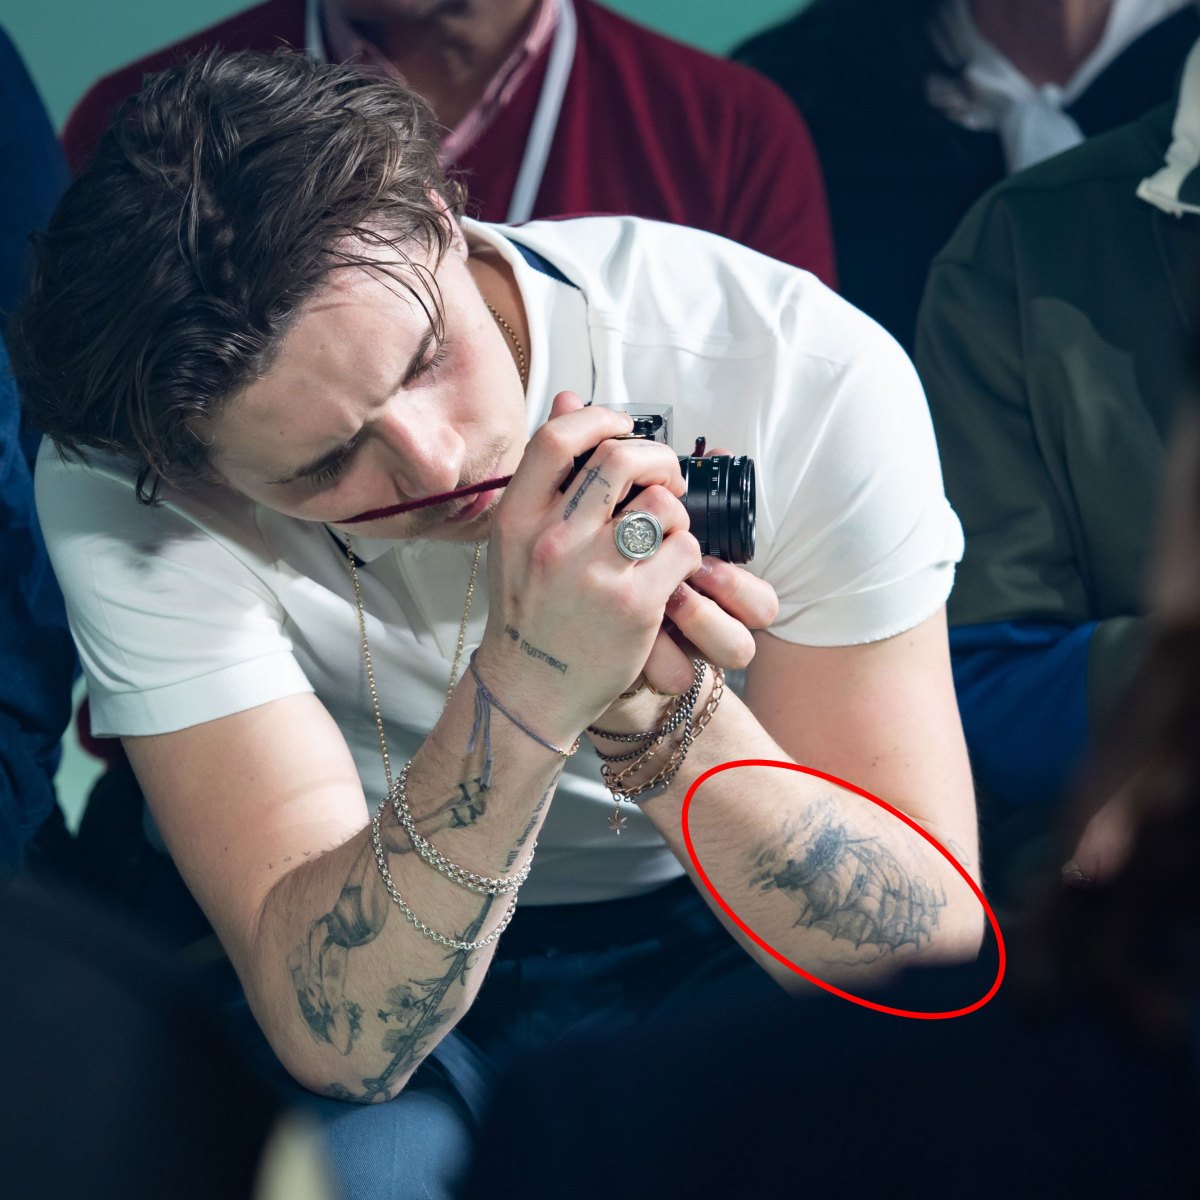 Brooklyn Beckham Tattoo Guide: Ink Designs, Meanings, Photos